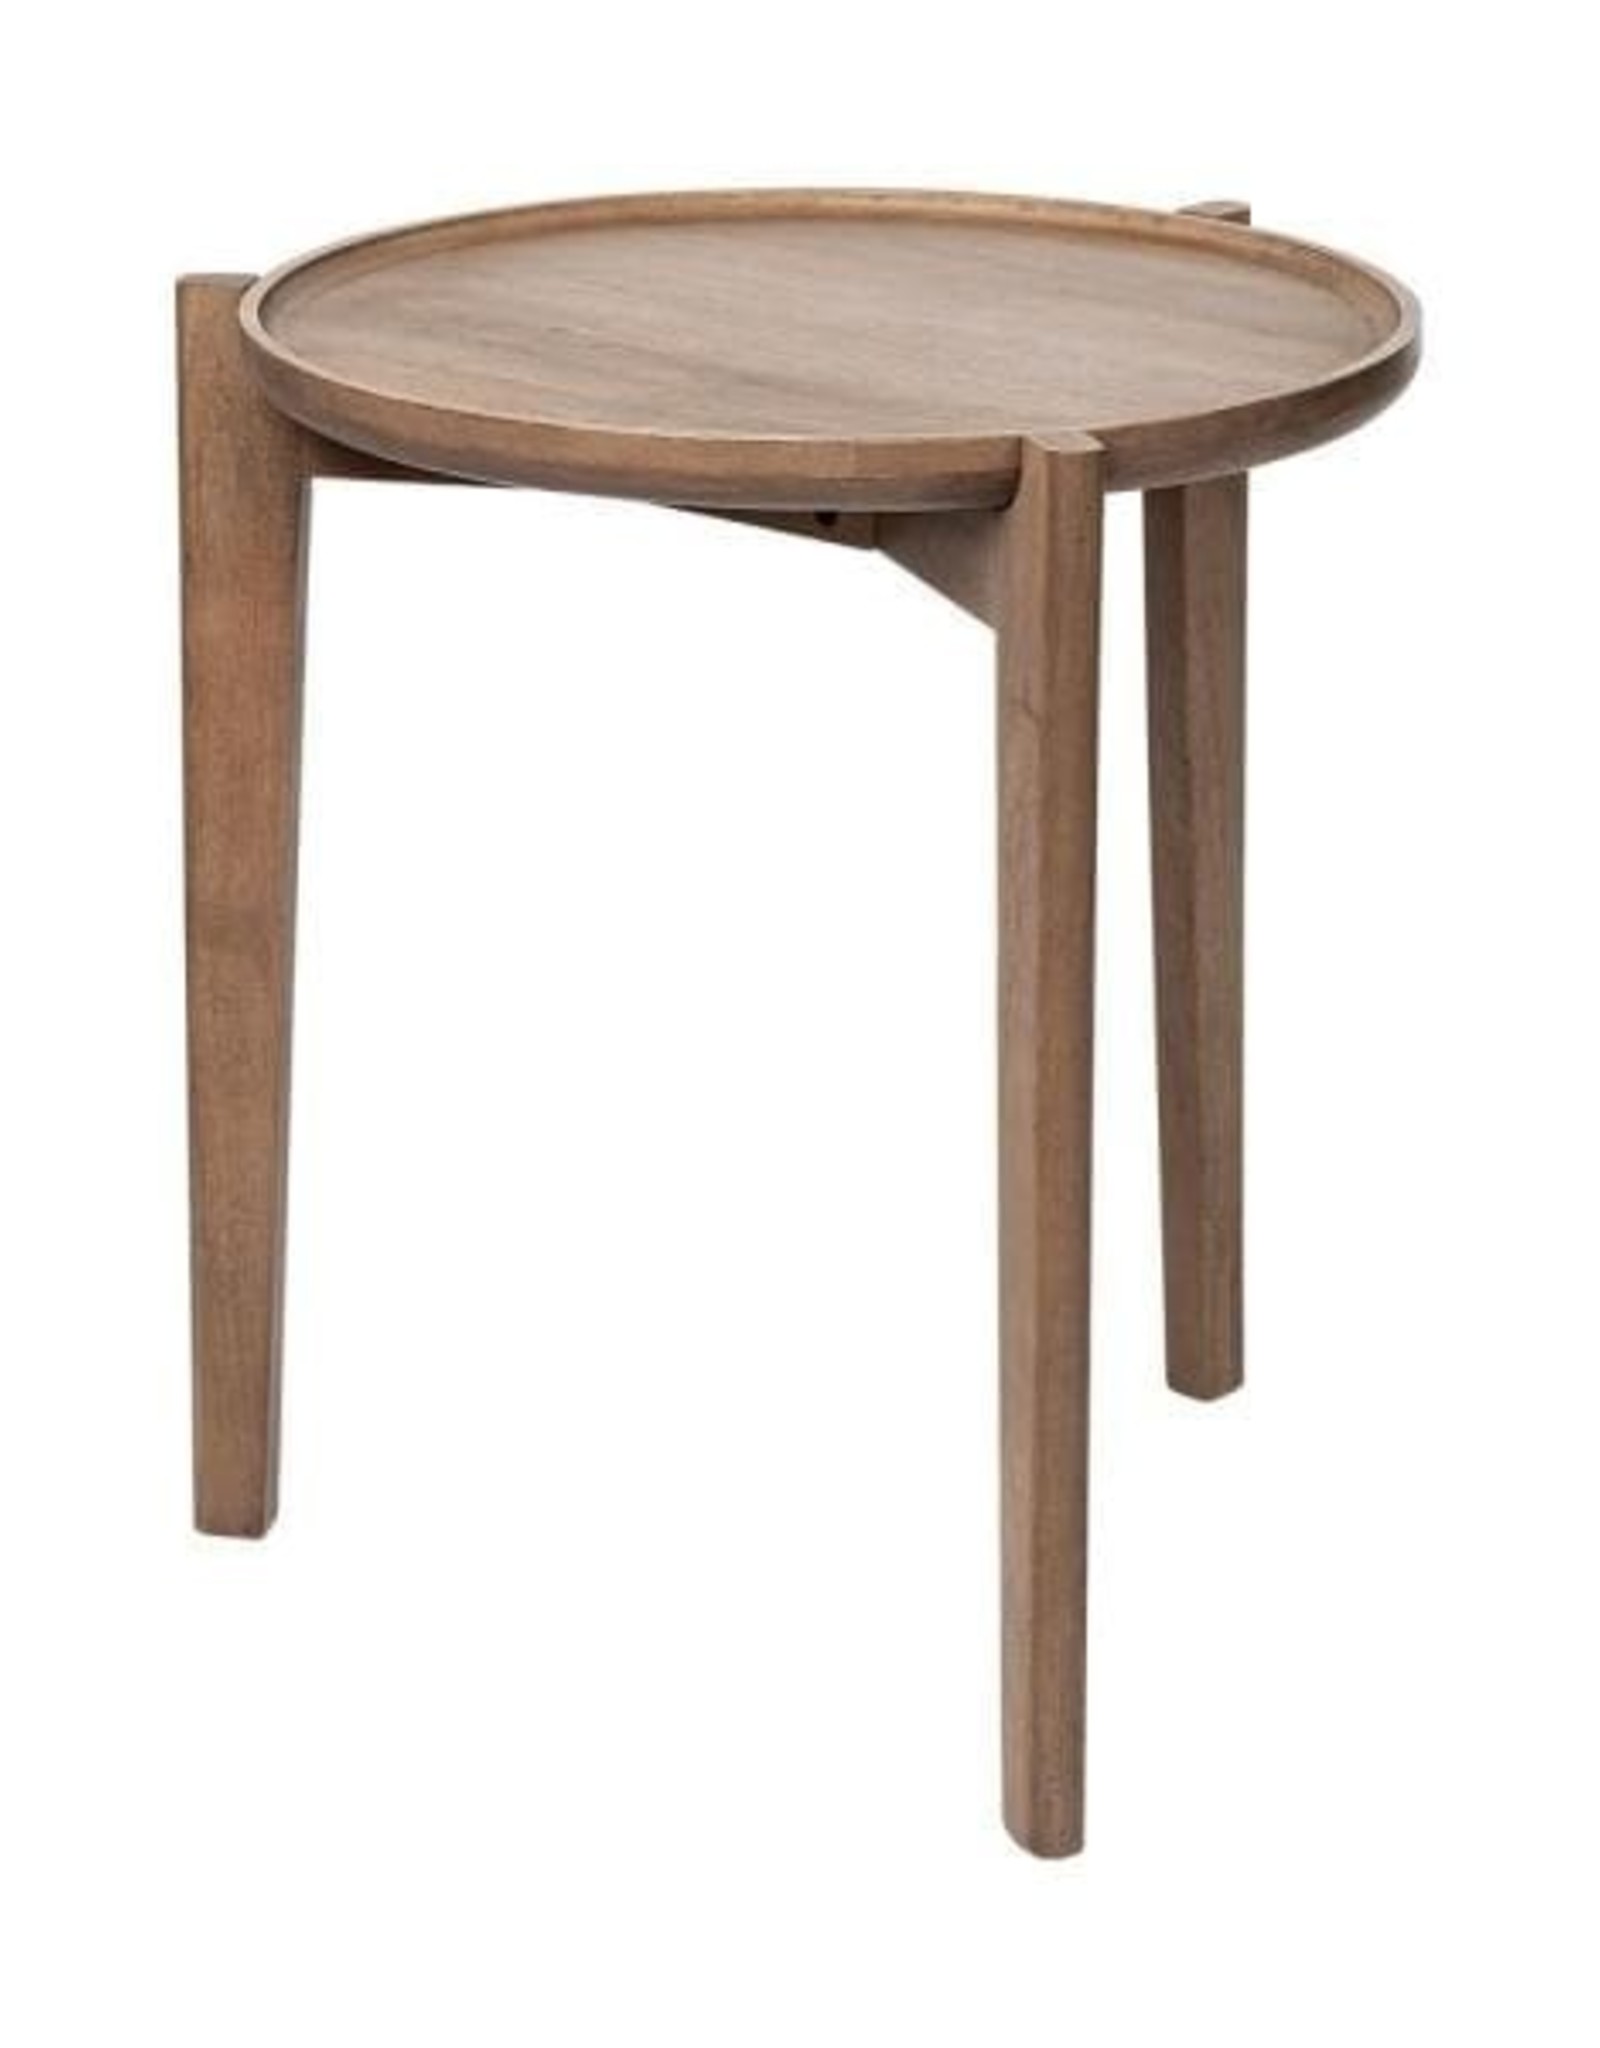 Cleaver Accent Table